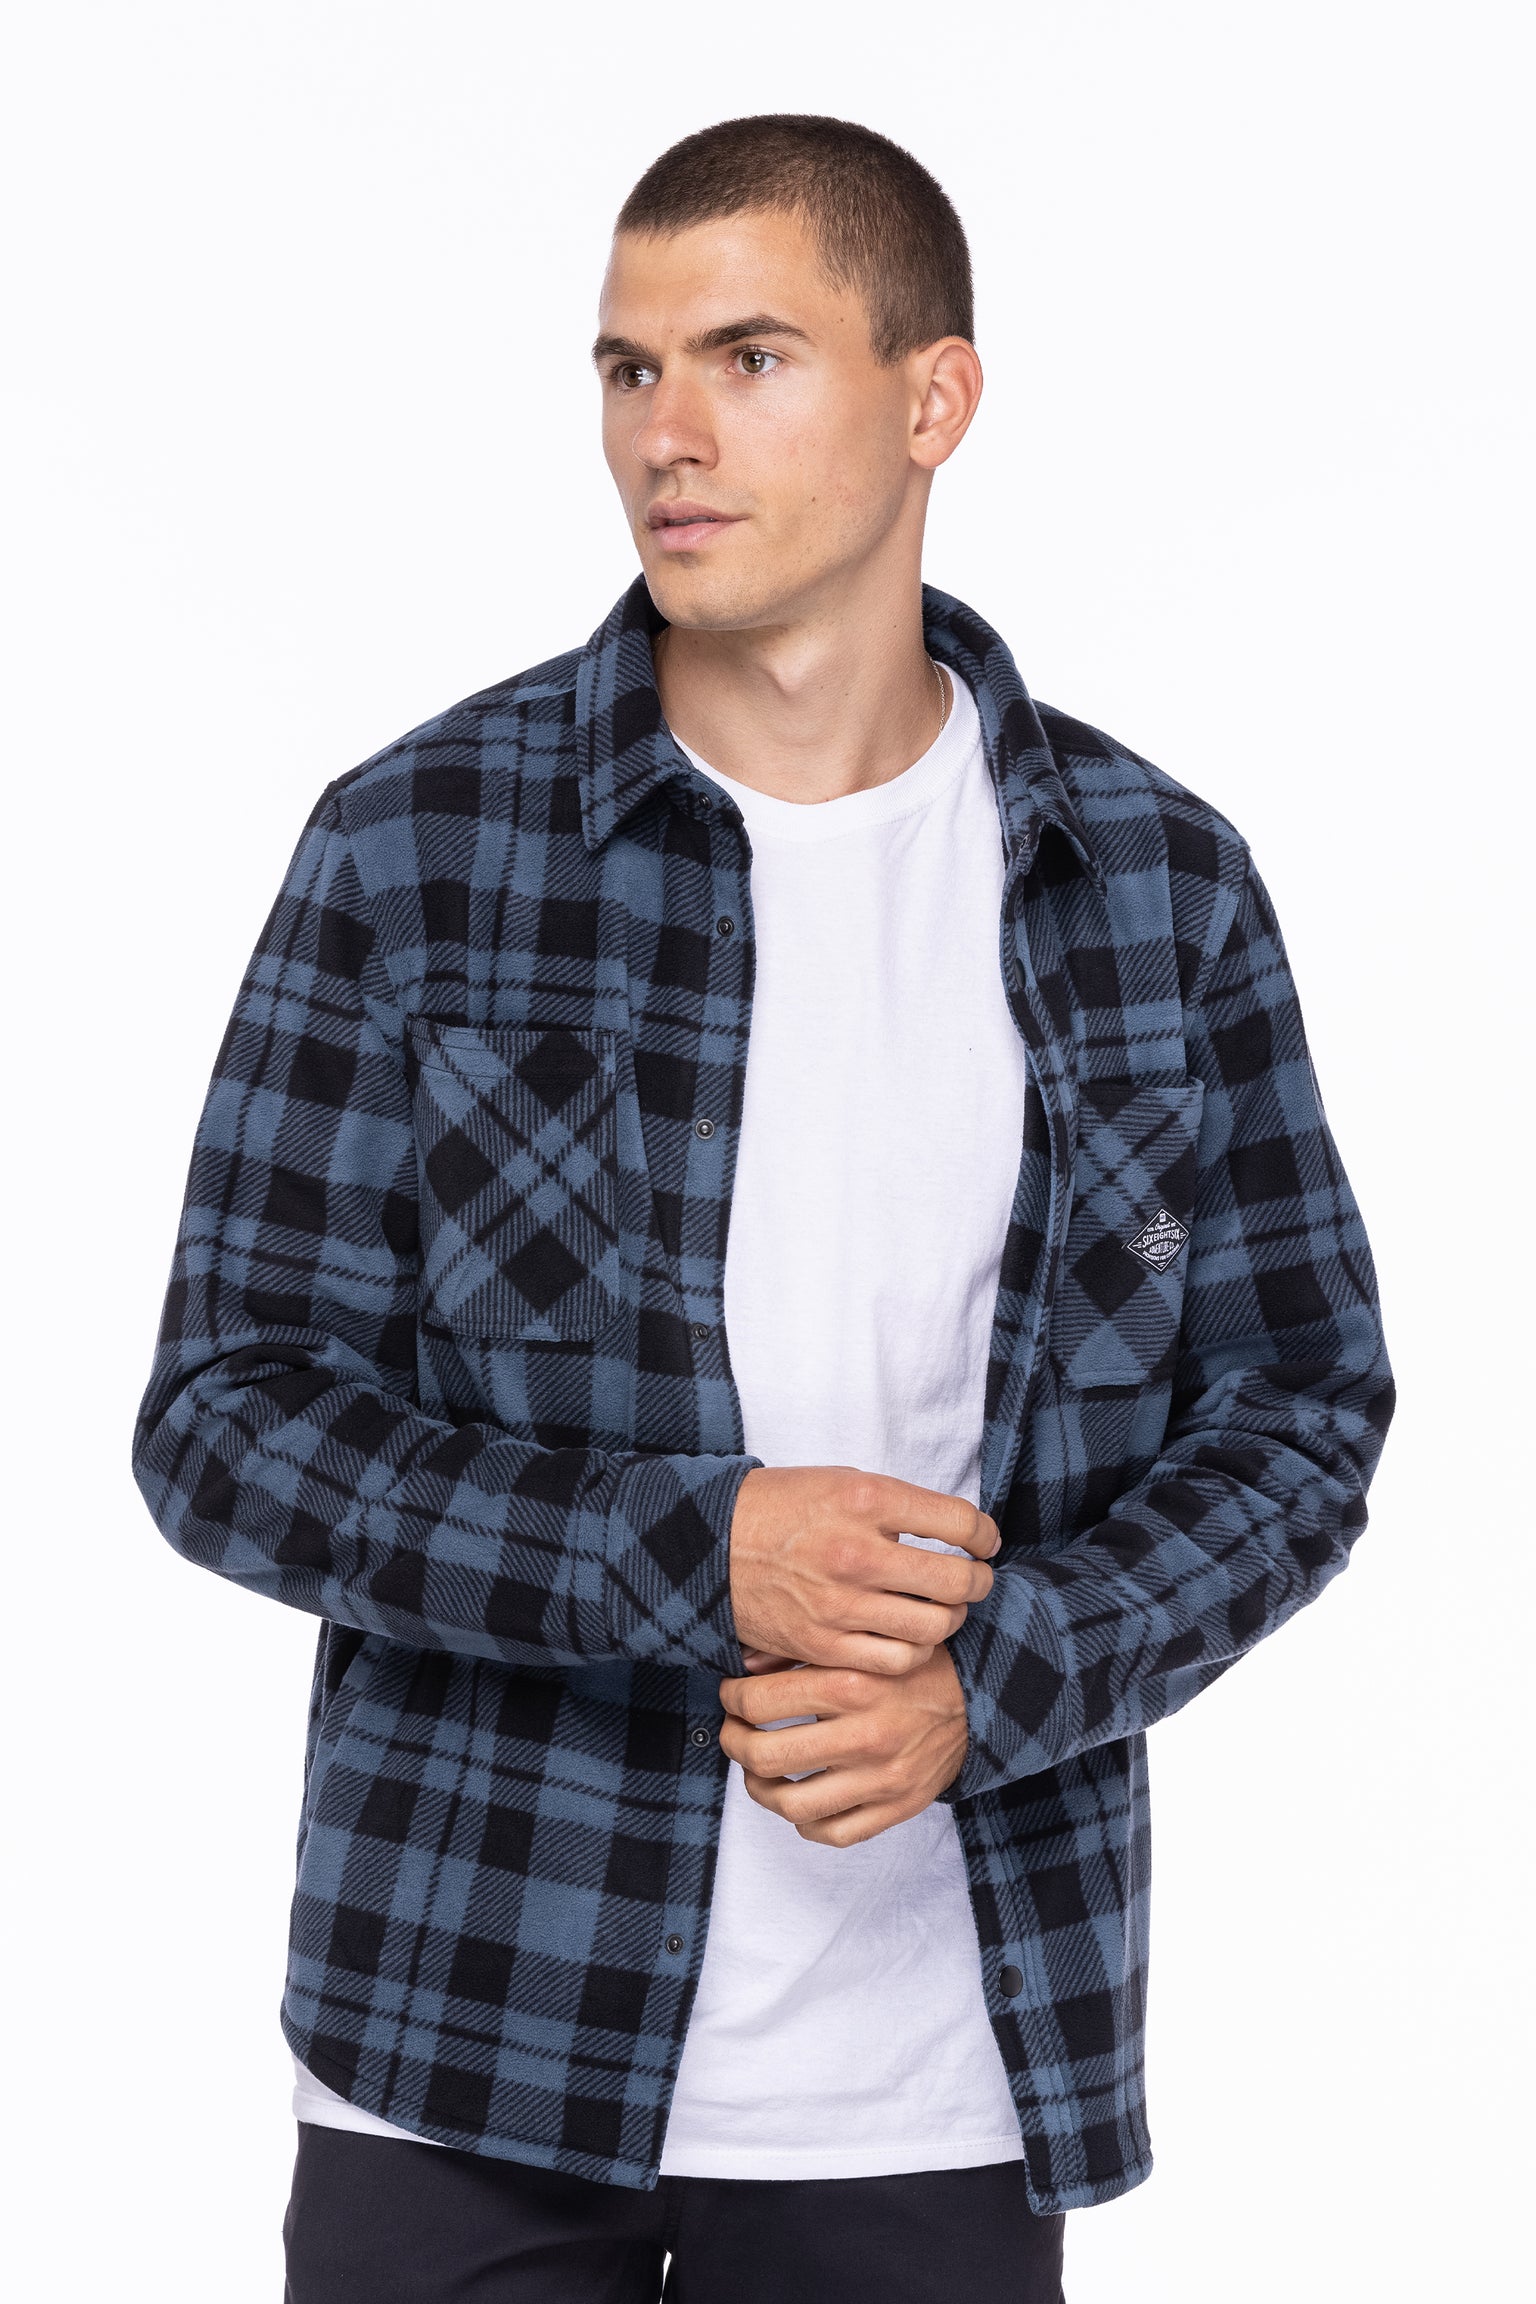 Shop Men's Street,Beach and Outdoor Clothing | Casual Apparel– 88 Gear